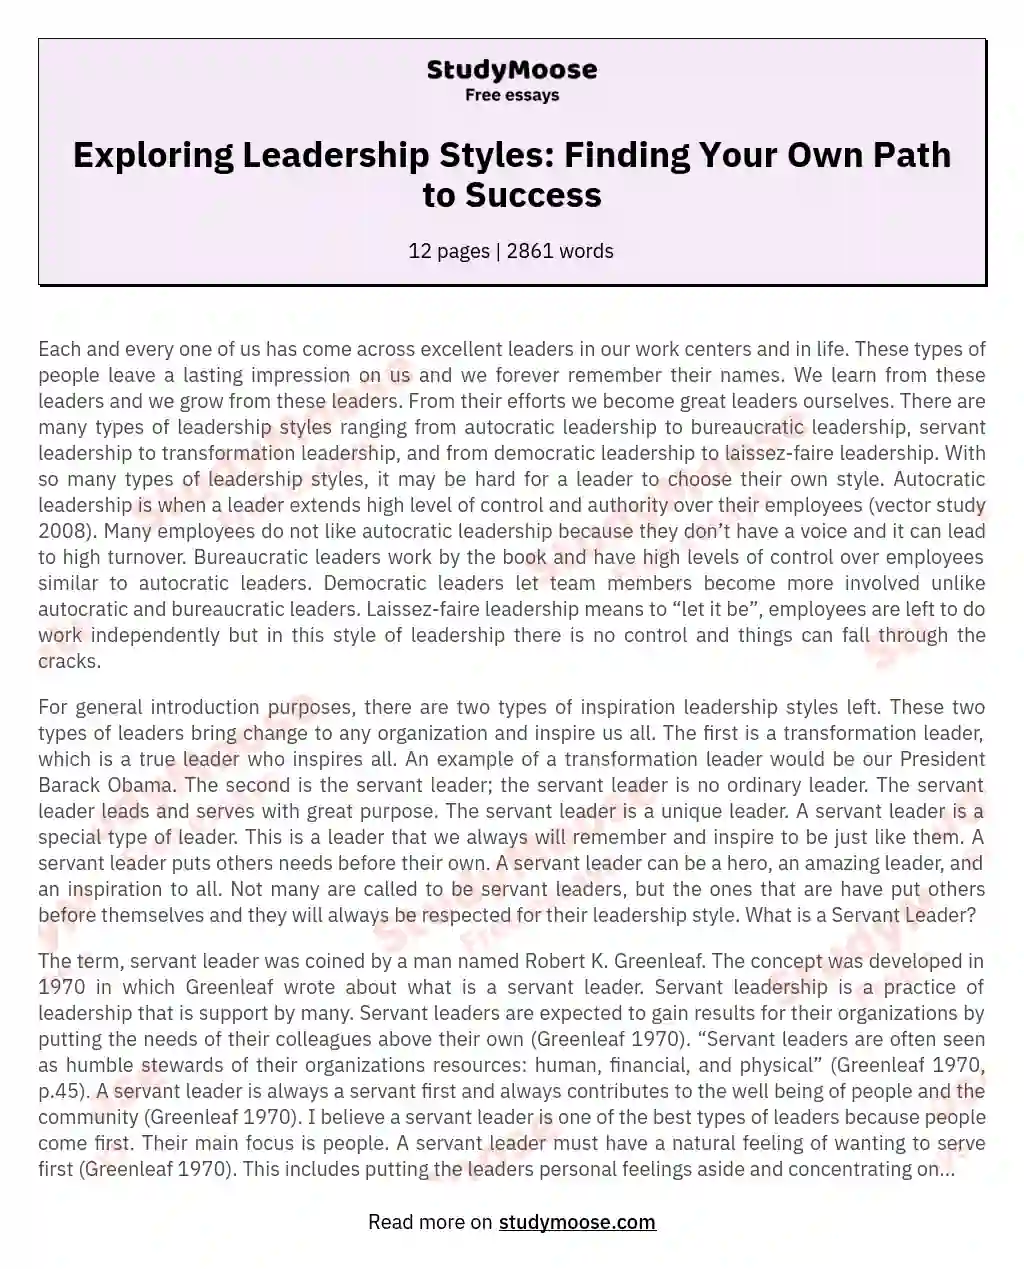 Exploring Leadership Styles: Finding Your Own Path to Success essay